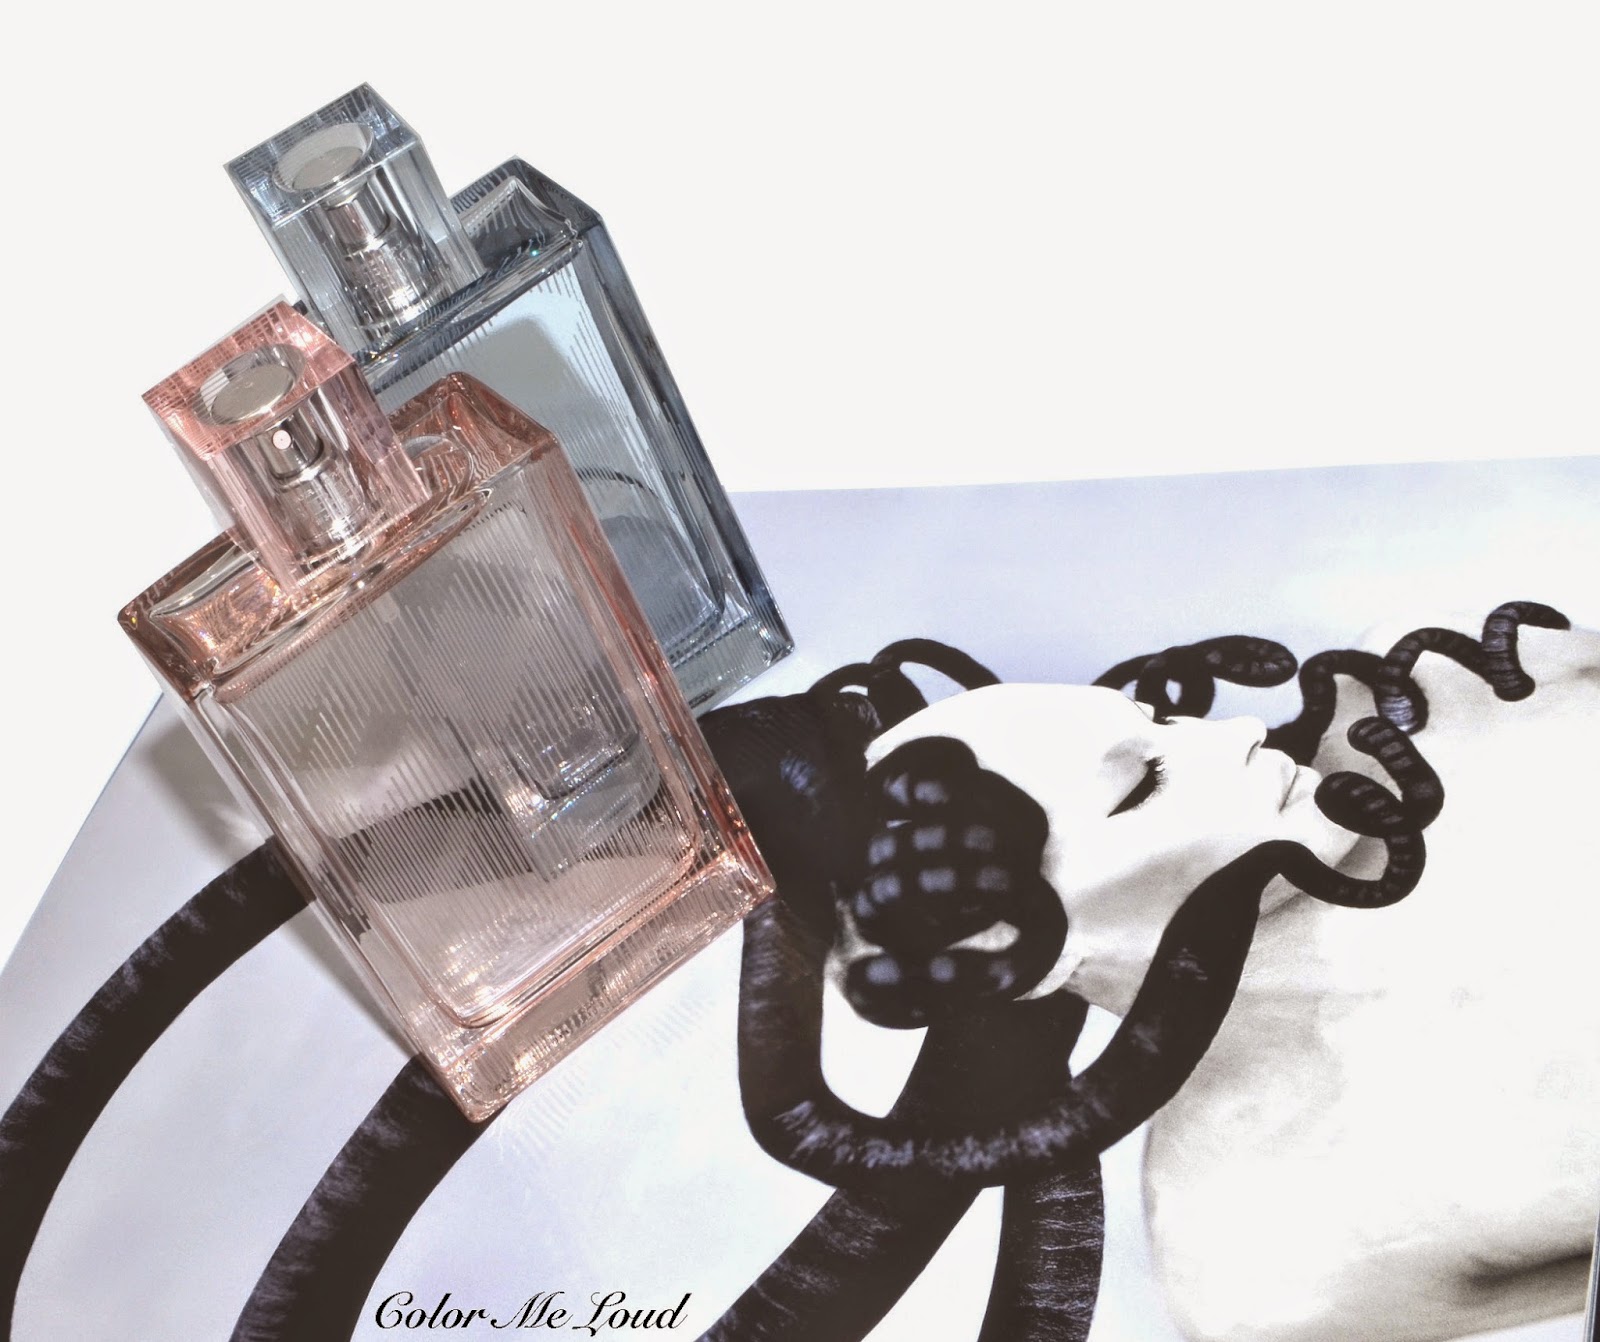 Burberry Brit Sheer For Her, Burberry Brit Splash For Him, EdT, Review |  Color Me Loud